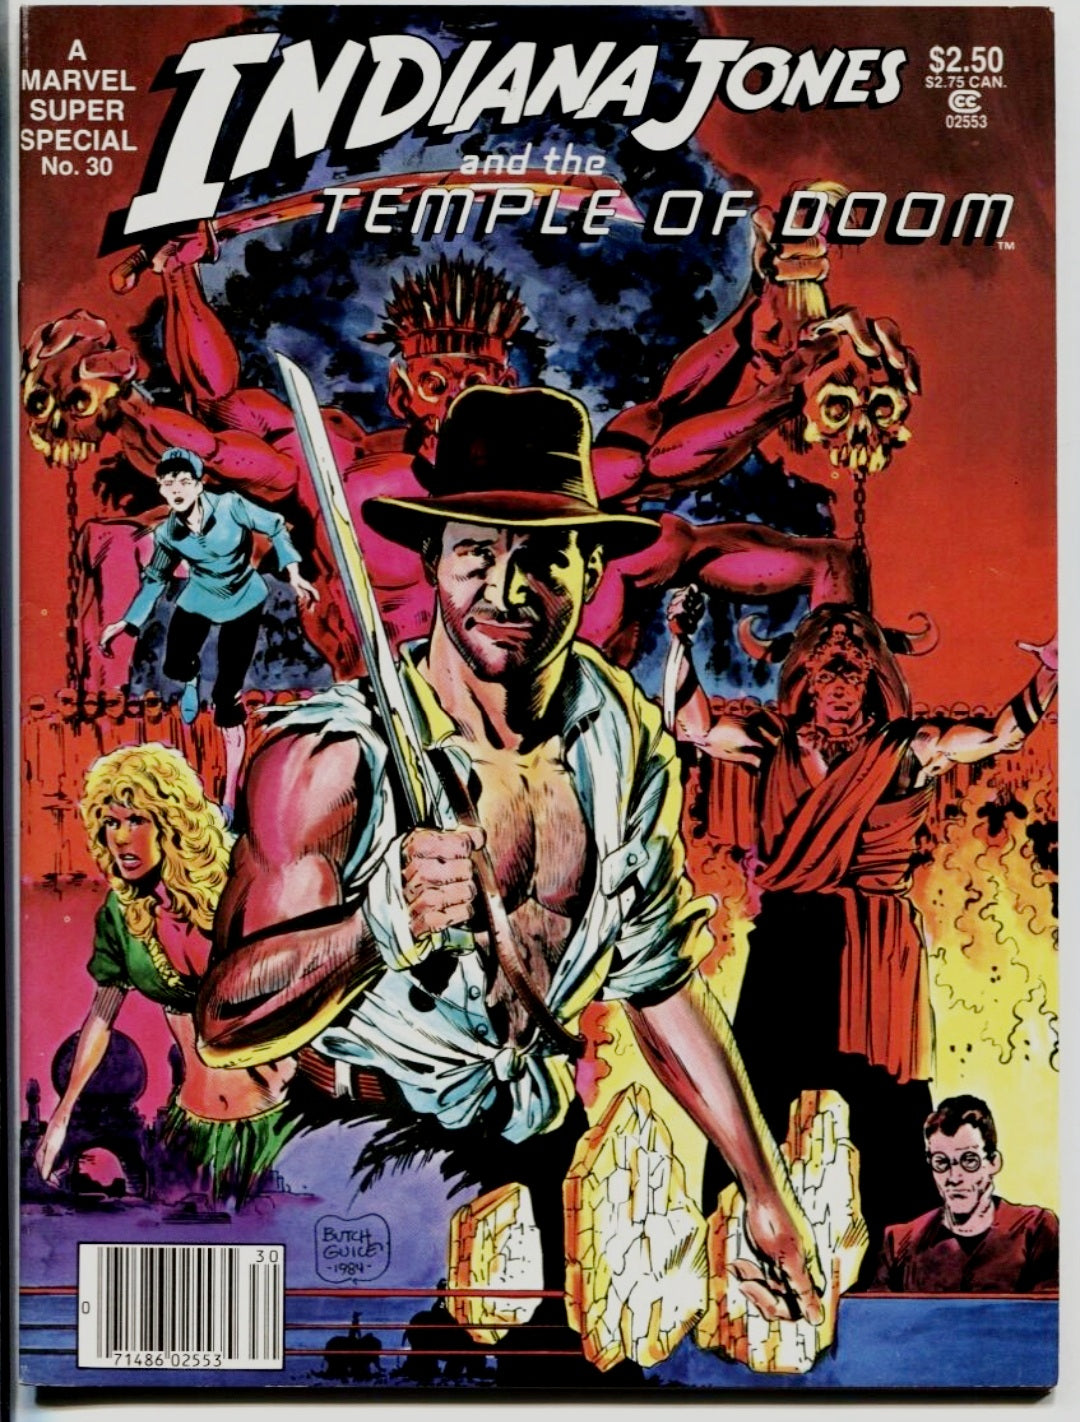 Marvel Super Special Issue #30 "Indiana Jones & Temple of Doom" (B.Guice)